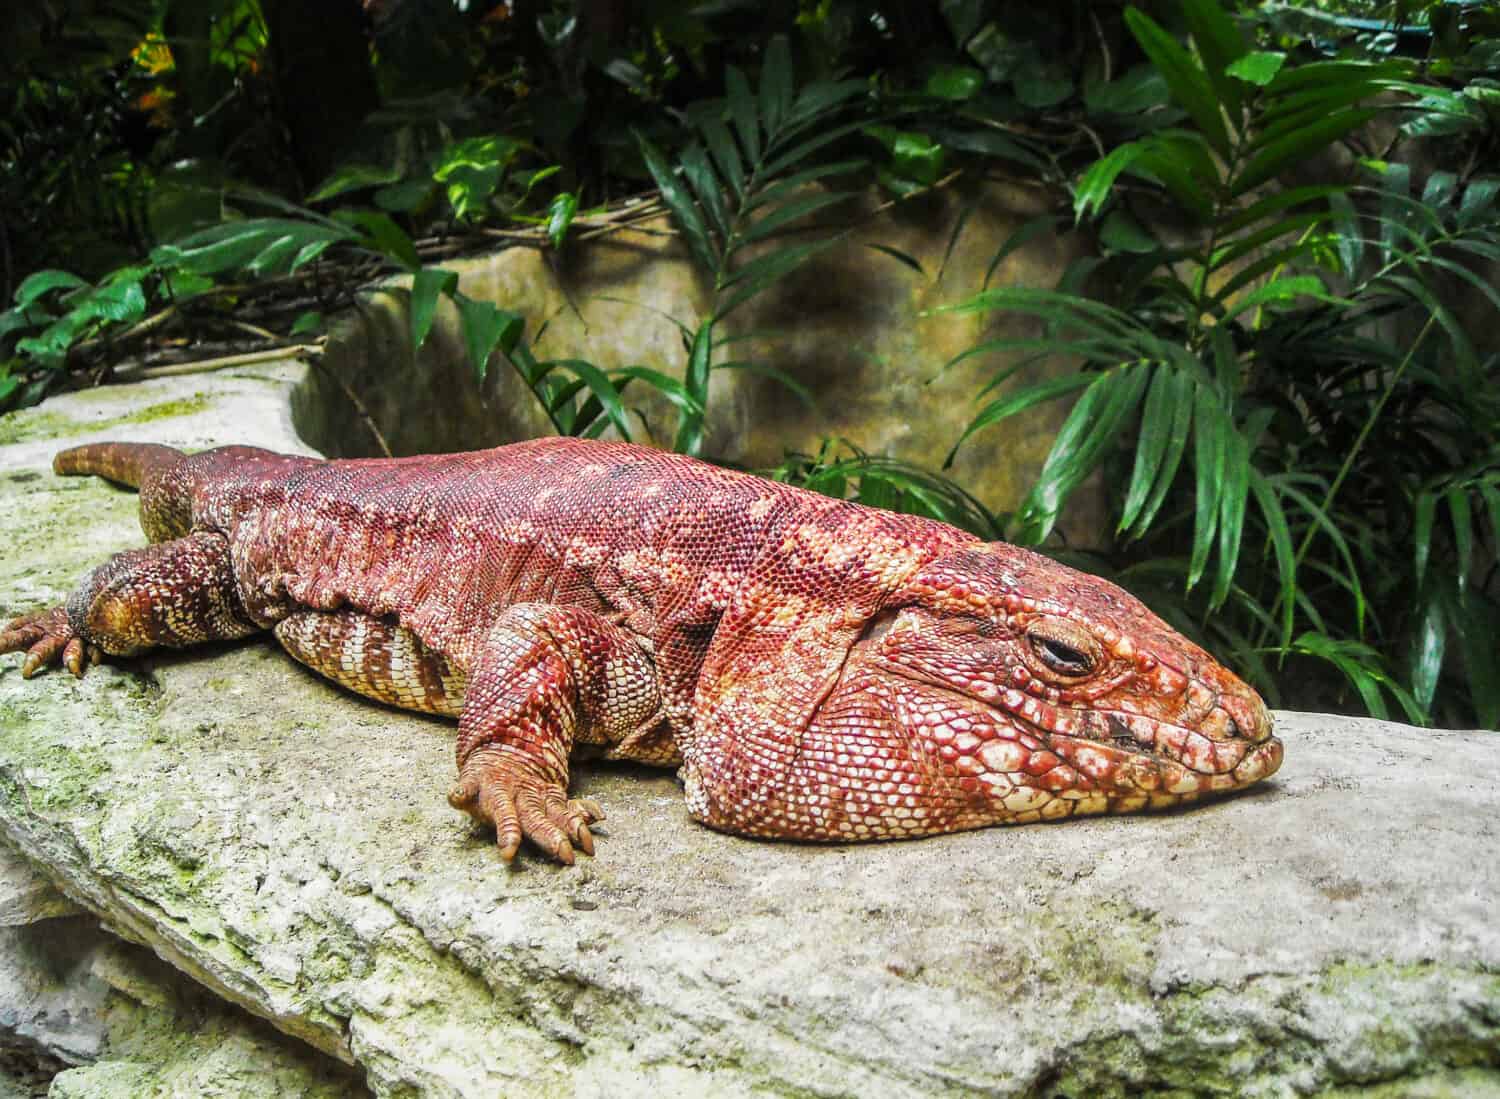 Close-up of a red tegu lizard, Tupinambis rufescens, in Yucatan, Mexico. Reptile, wildlife and animal concept.